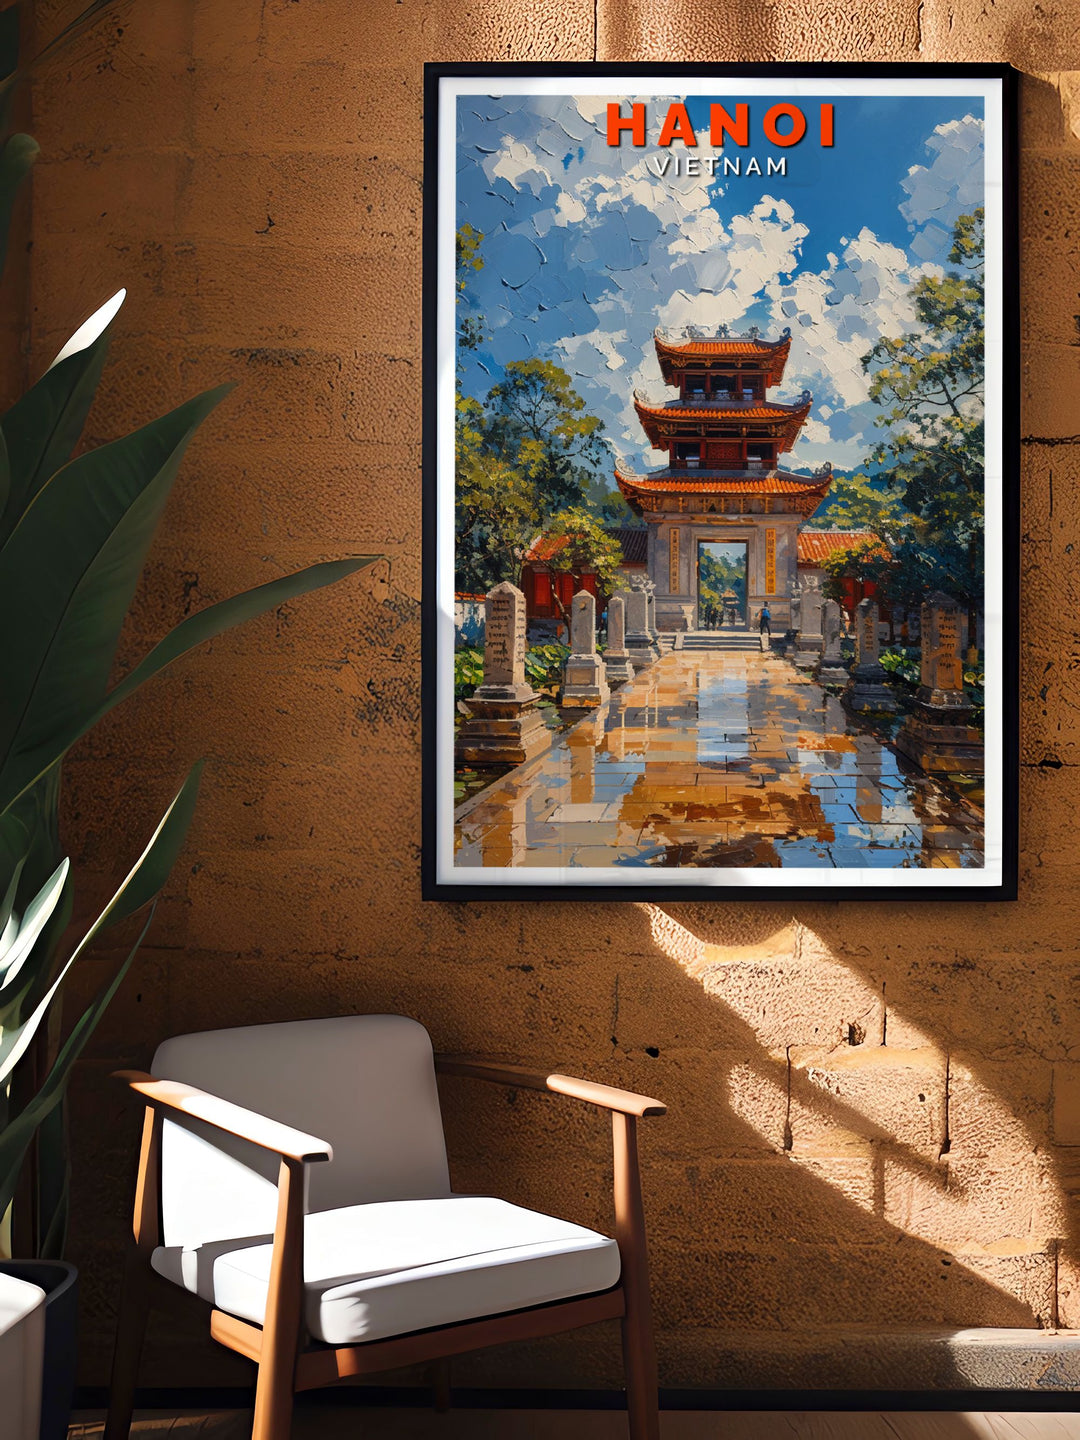 Featuring the lush gardens and historic buildings of the Temple of Literature, this travel poster brings the cultural richness of Hanoi into your home.